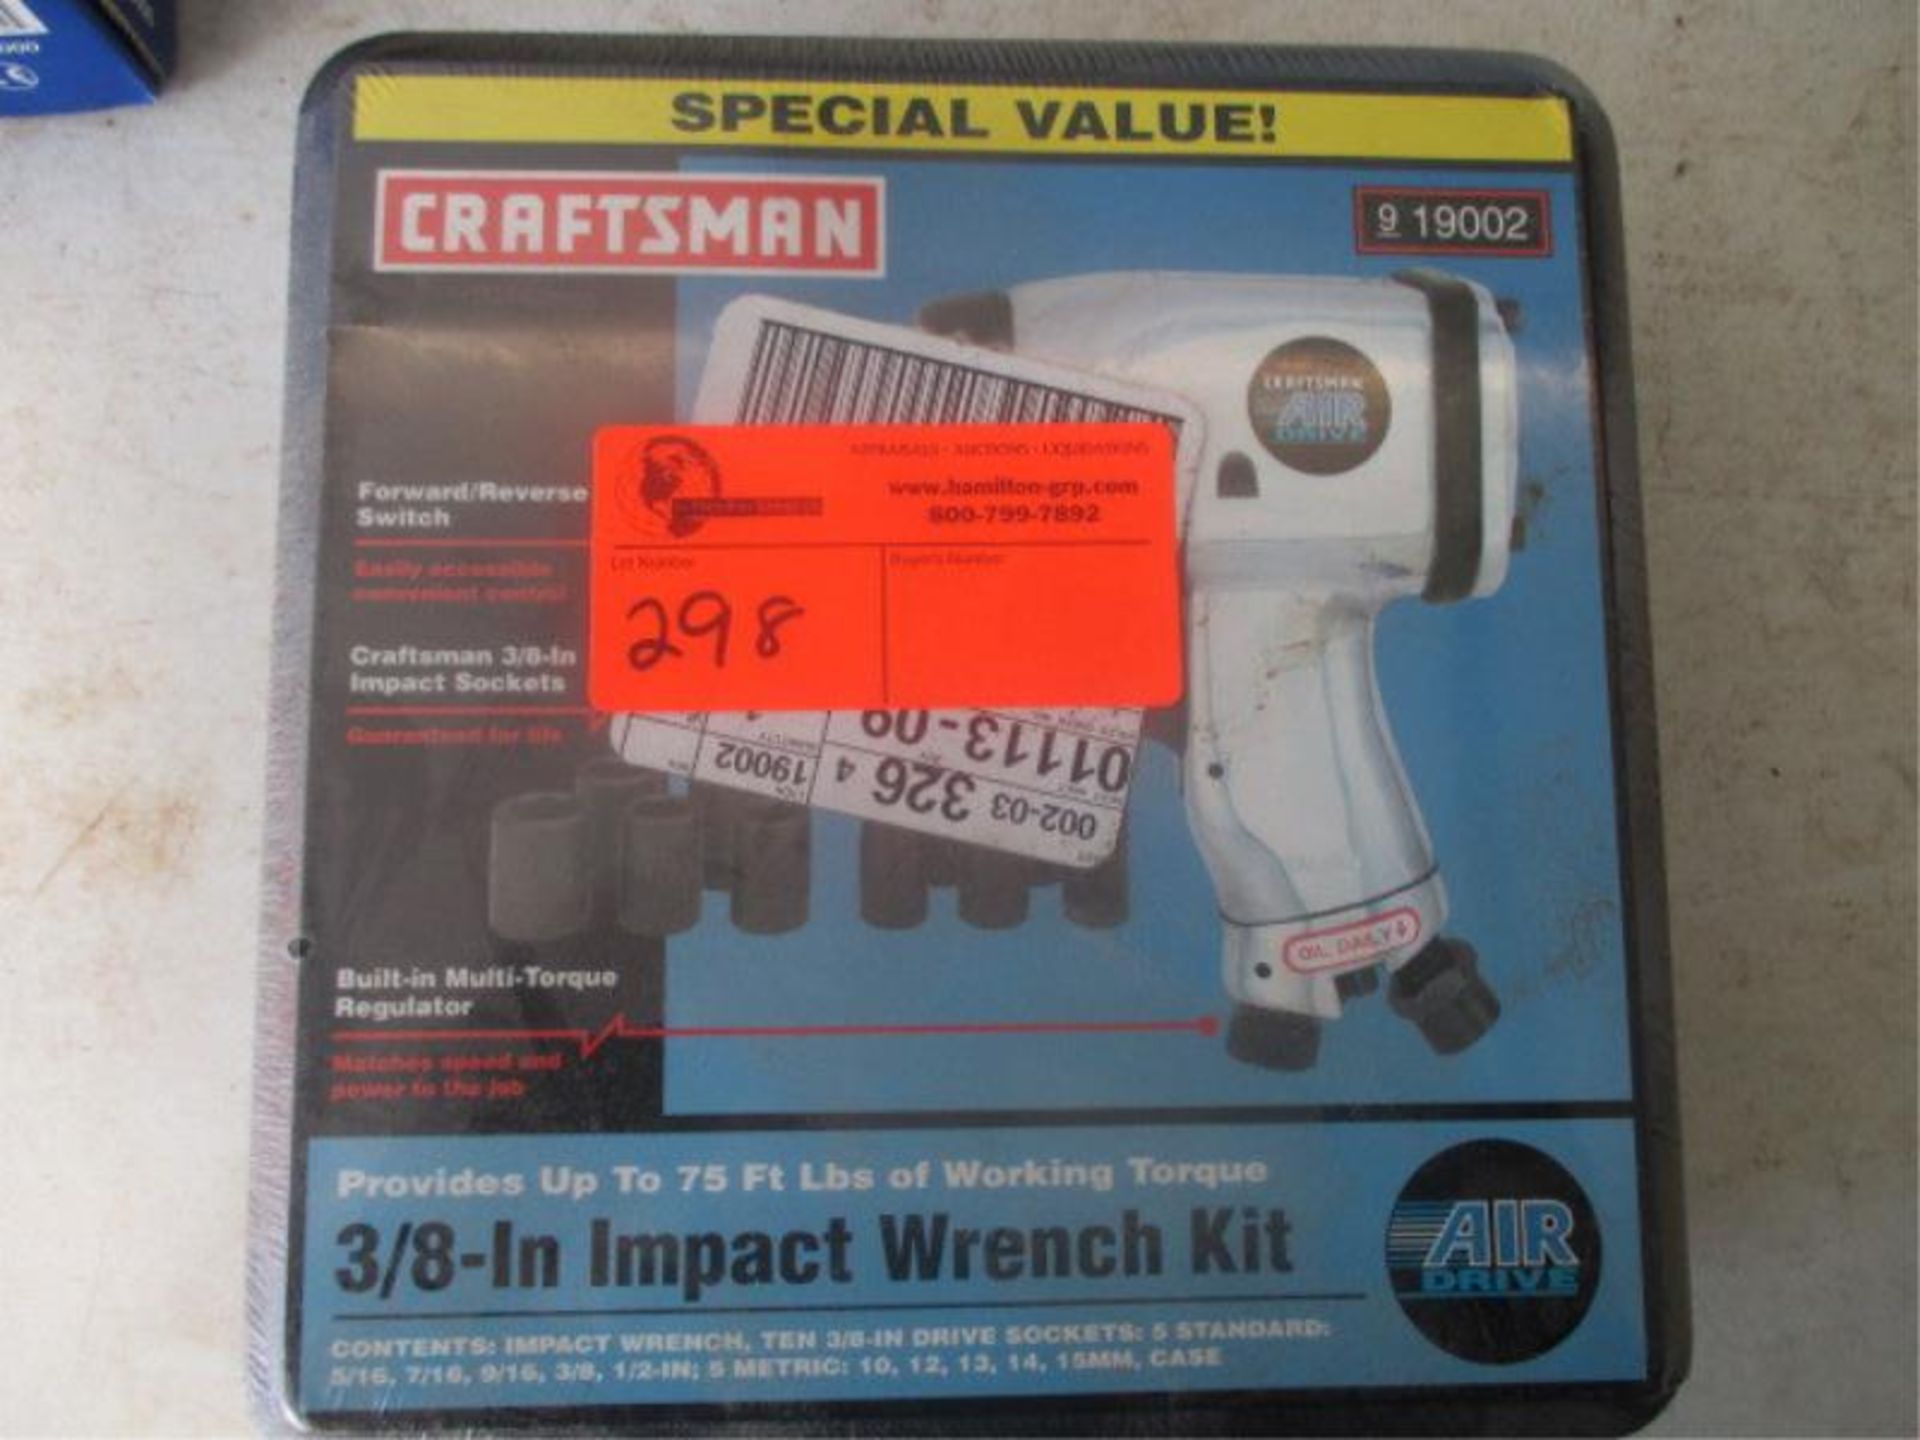 Impact Wrench Kit, 6/8", Craftsman Air Drive, Model: 919002 in Case, New Wrapped Model: 919002 in